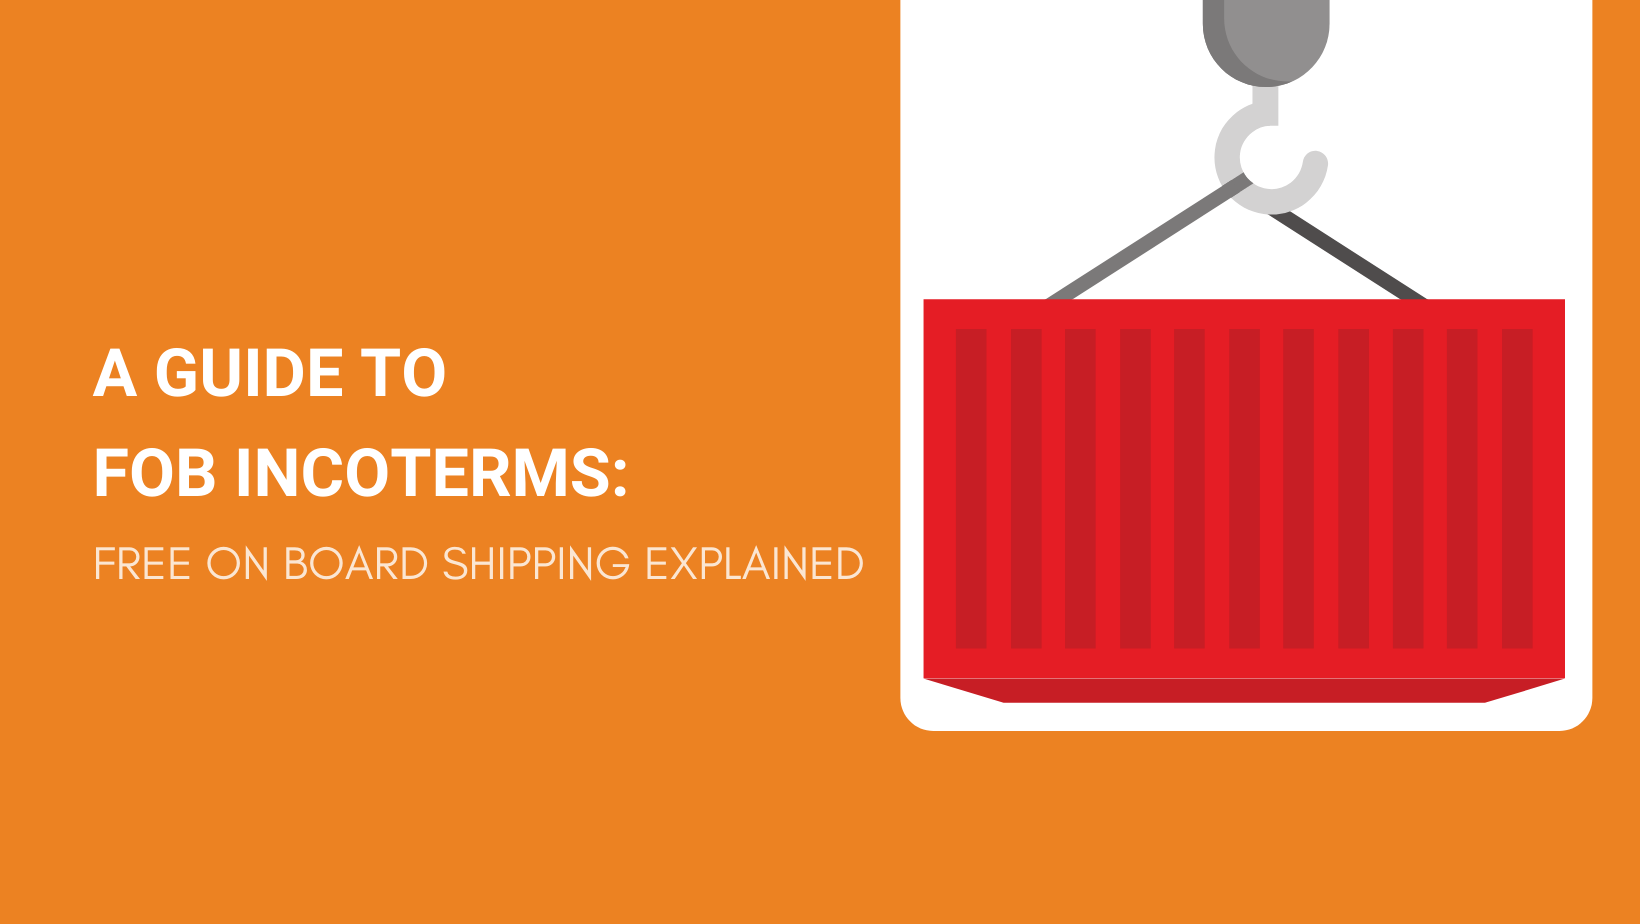 A Guide To Fob Incoterms Free On Board Shipping Explained 2586